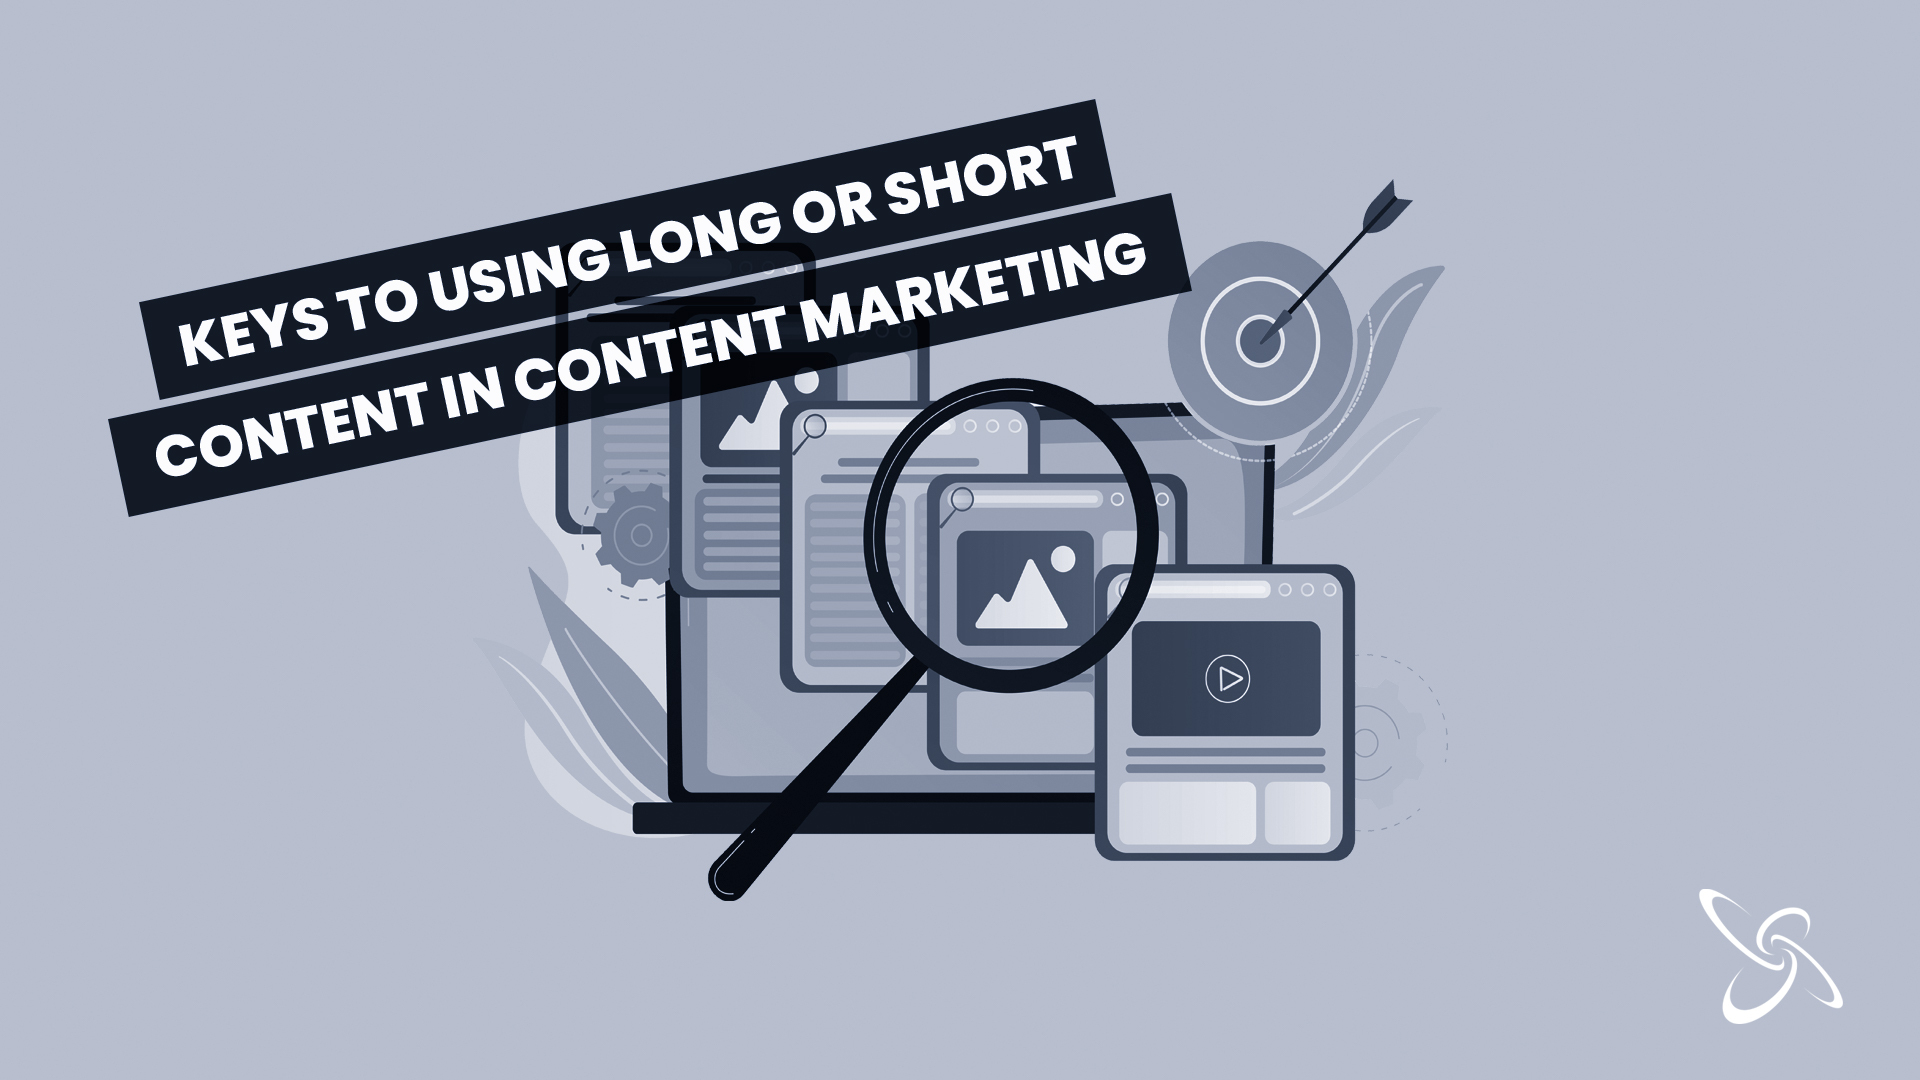 keys to using long or short content in content marketing